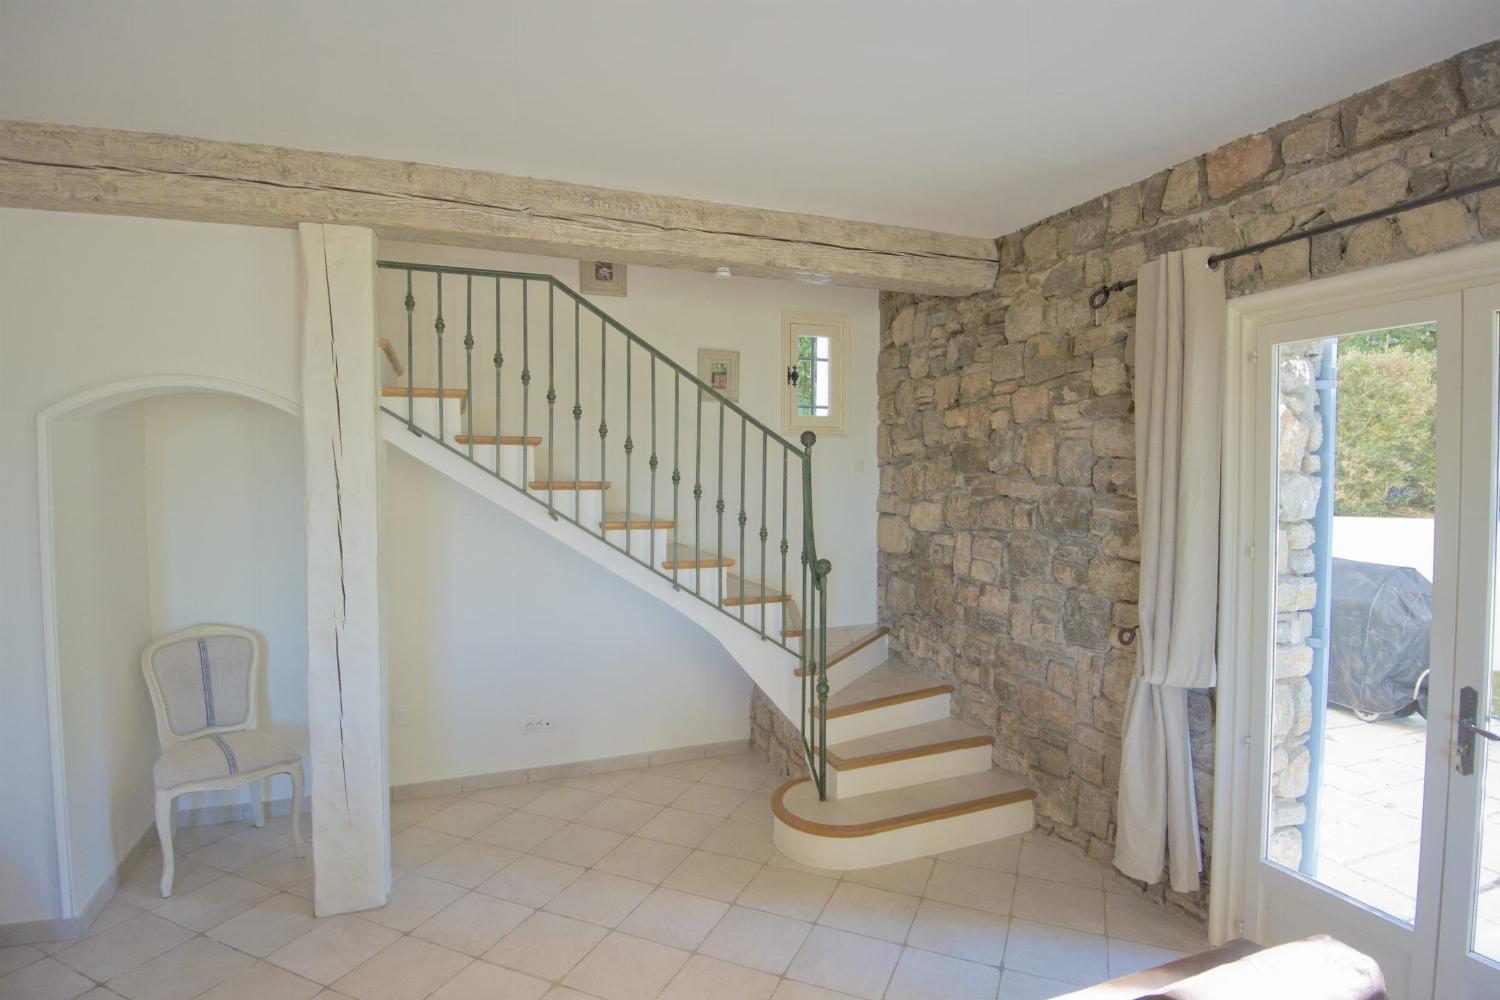 Staircase | Self-catering home in Provence